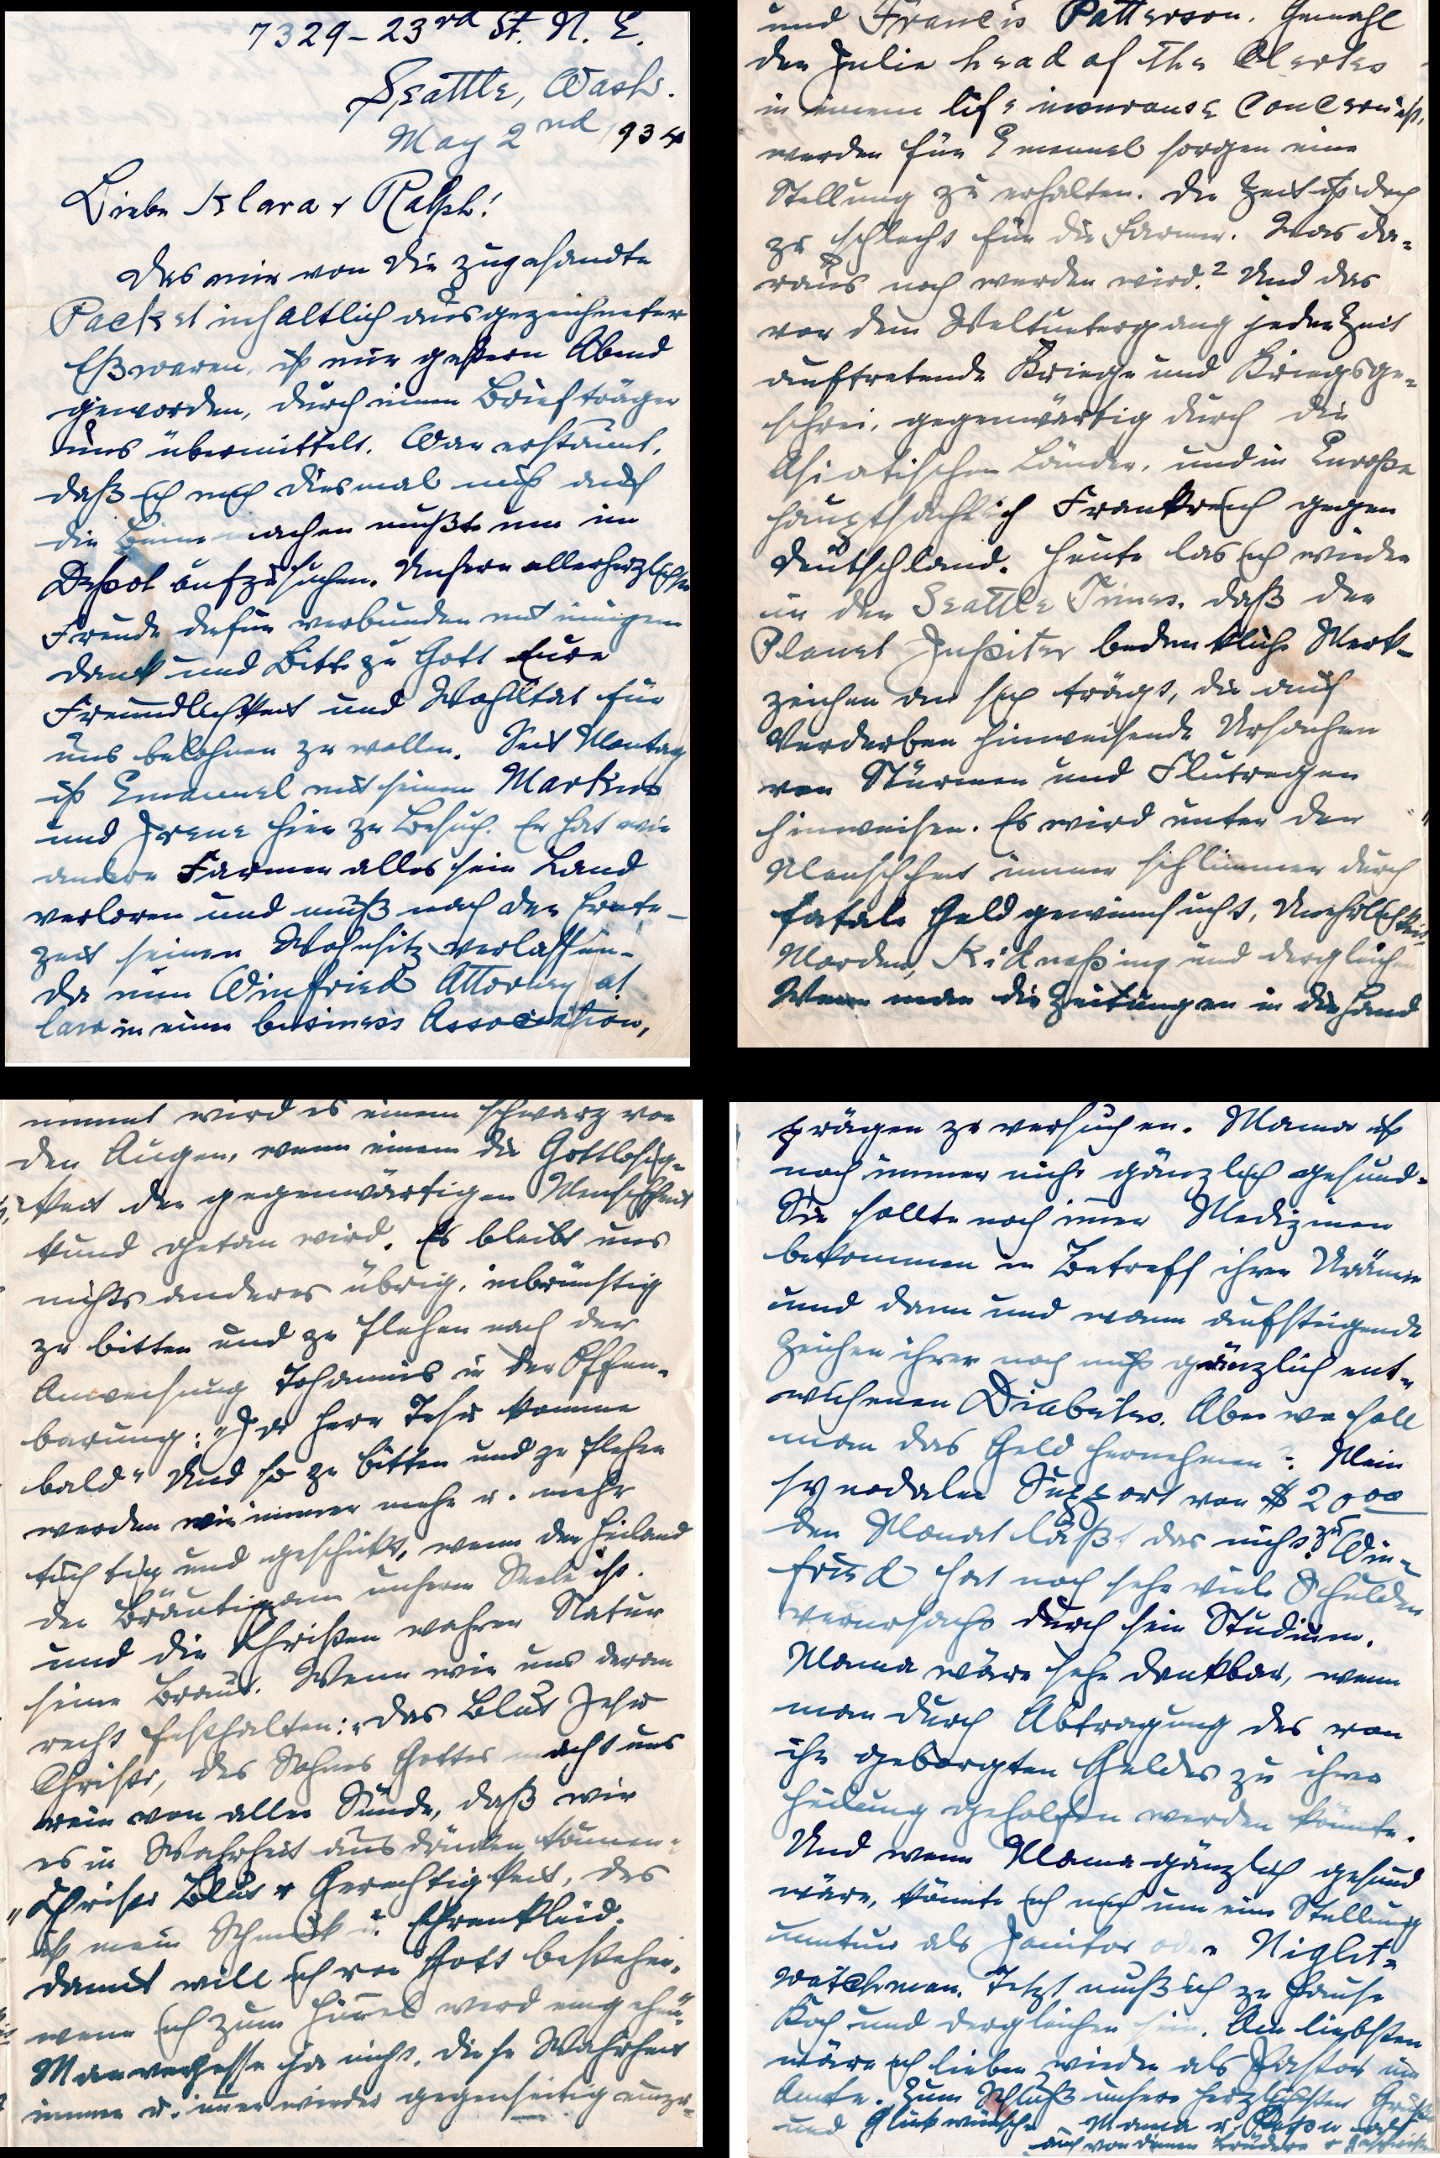 Help Translating German Cursive To English. Winfred Letter